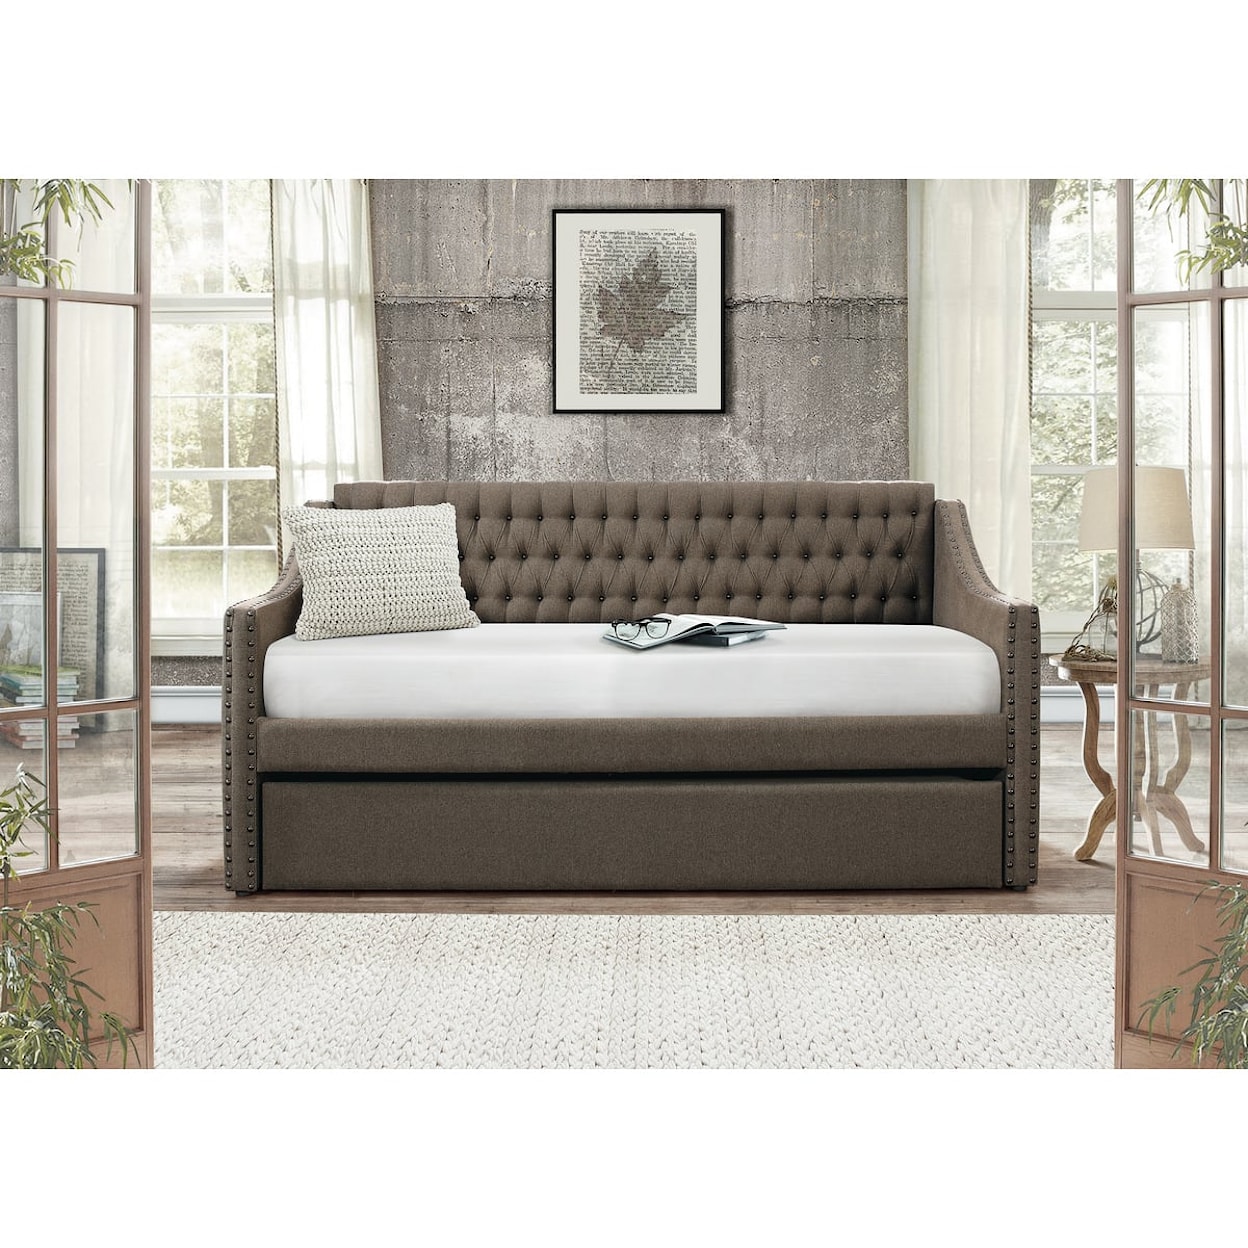 Homelegance Tulney Daybed with Trundle